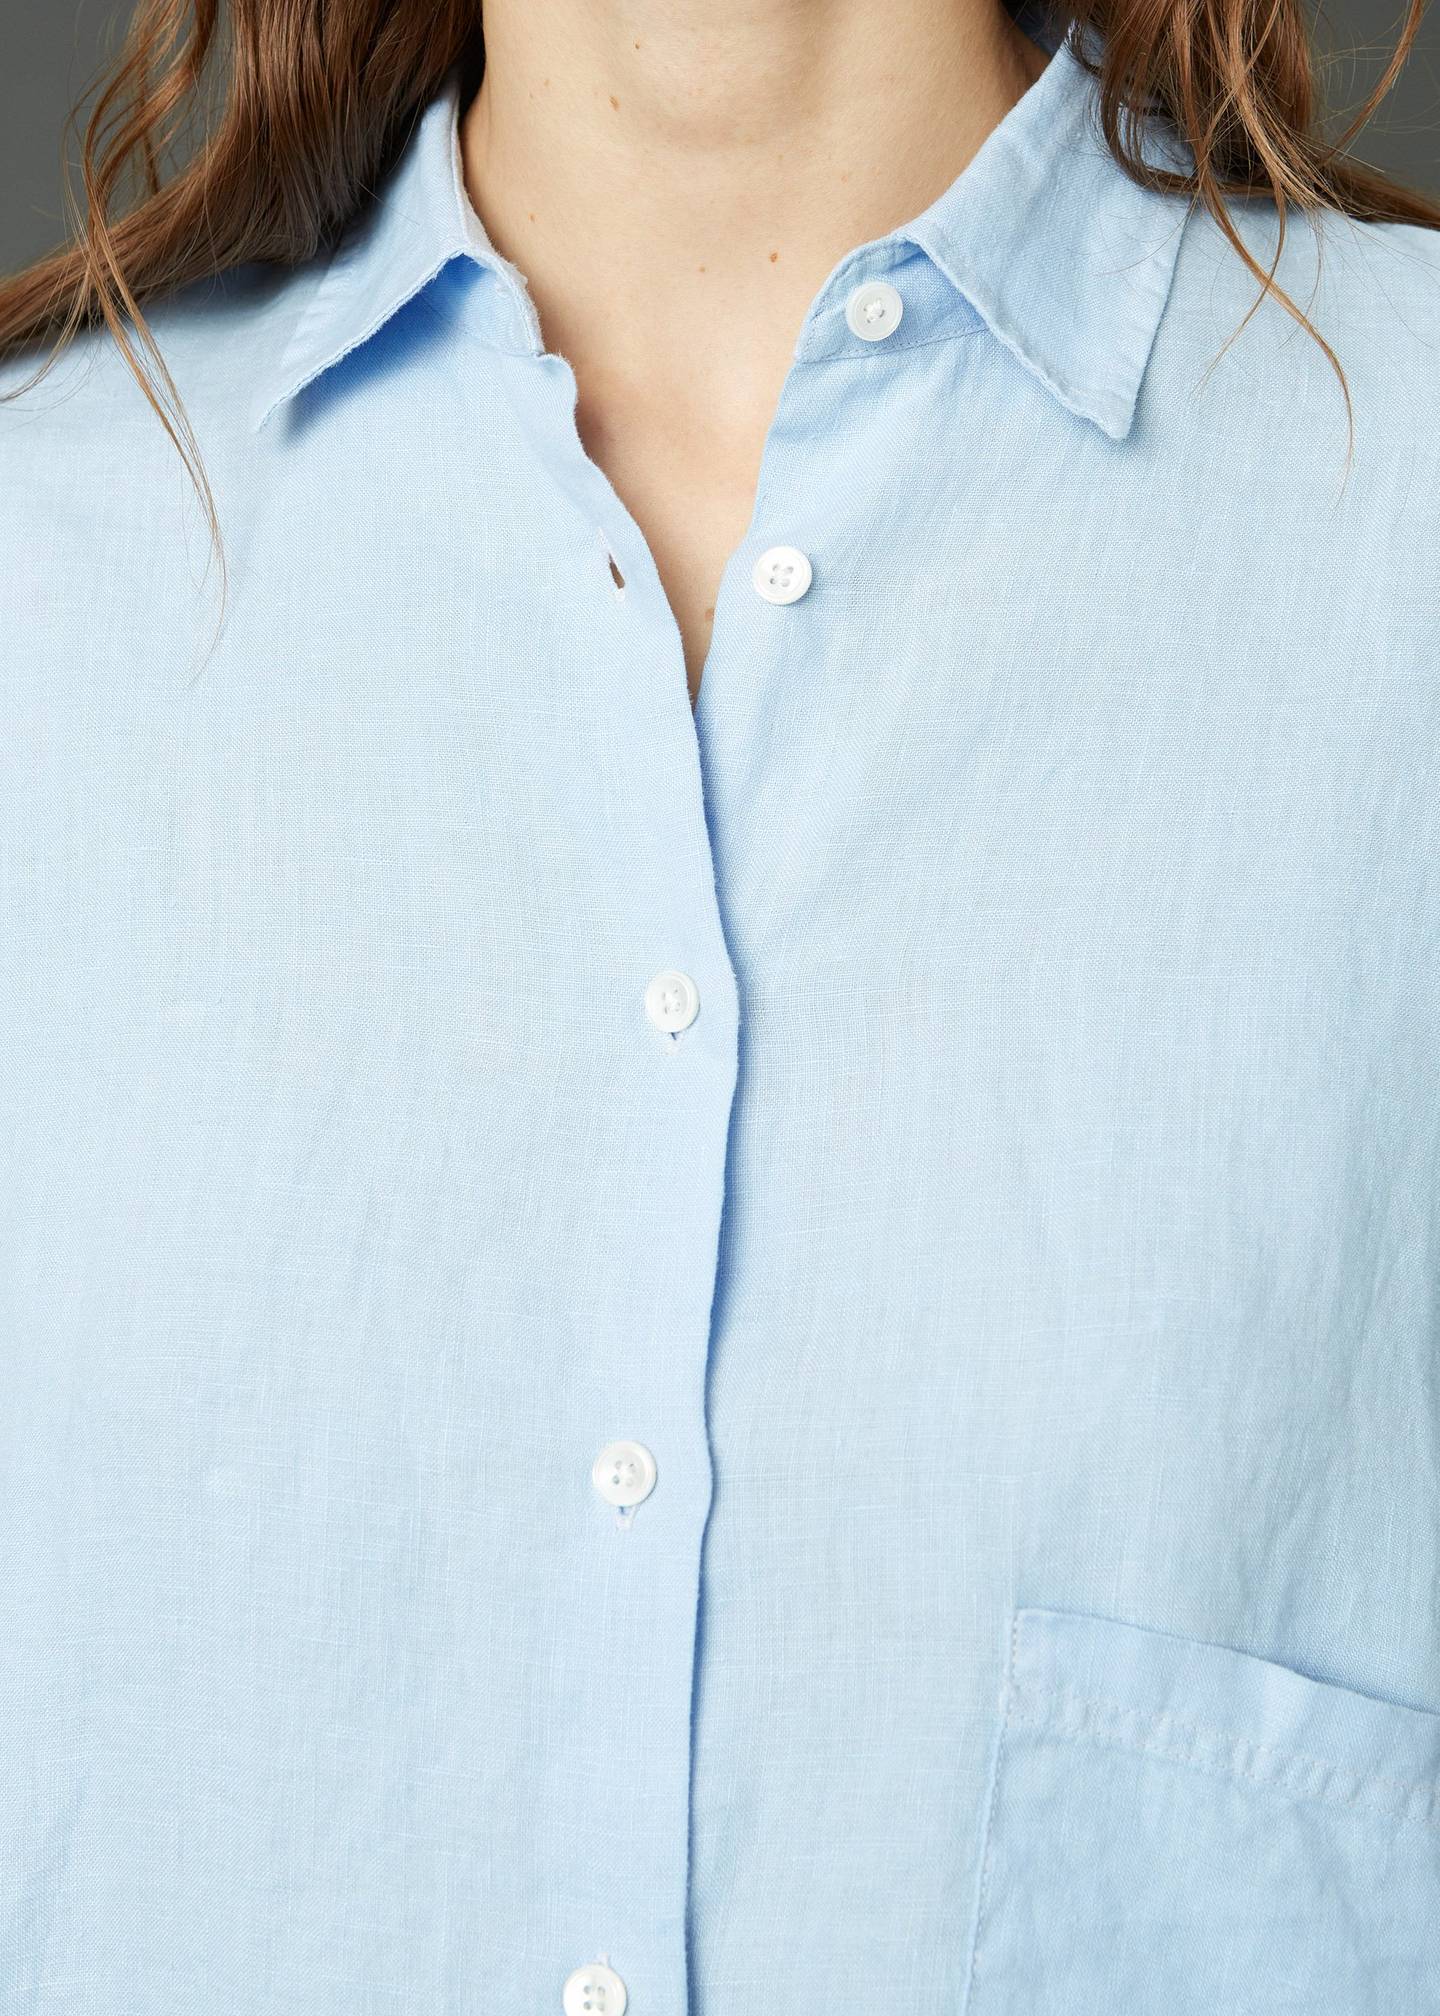 LINEN SHIRT IN BLUE BY HOPE